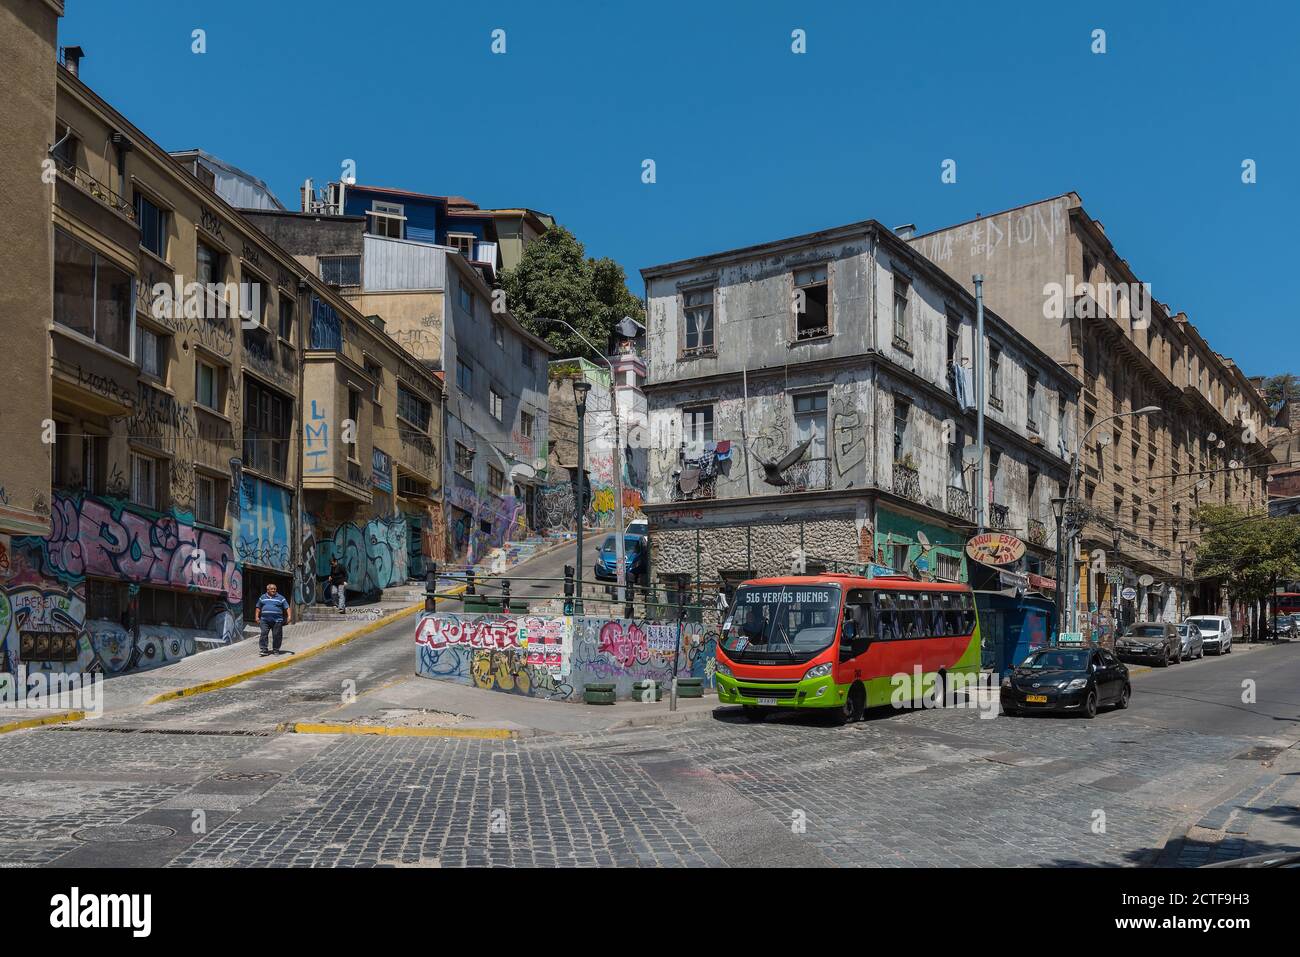 A view of a street in the old town of Valparaiso, Chile Stock Photo